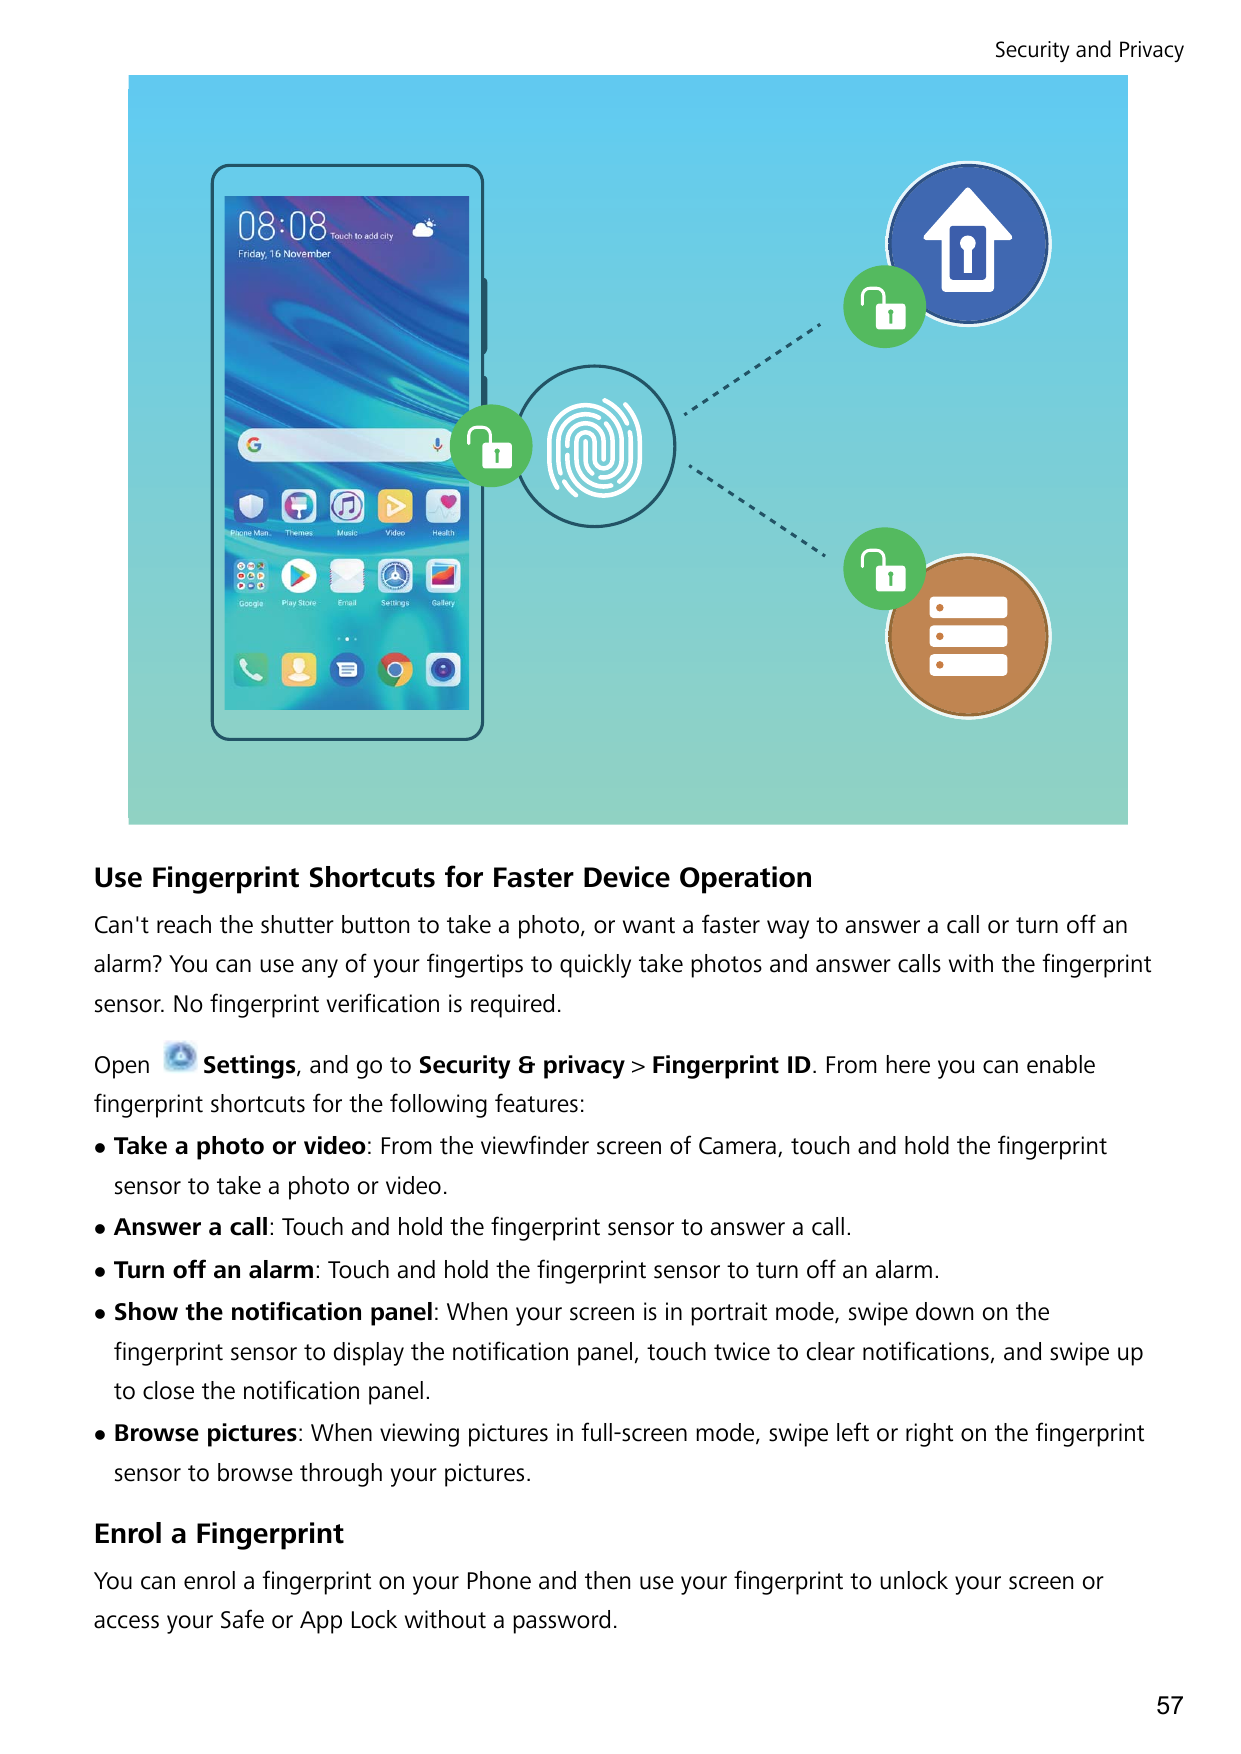 Security and PrivacyUse Fingerprint Shortcuts for Faster Device OperationCan't reach the shutter button to take a photo, or want